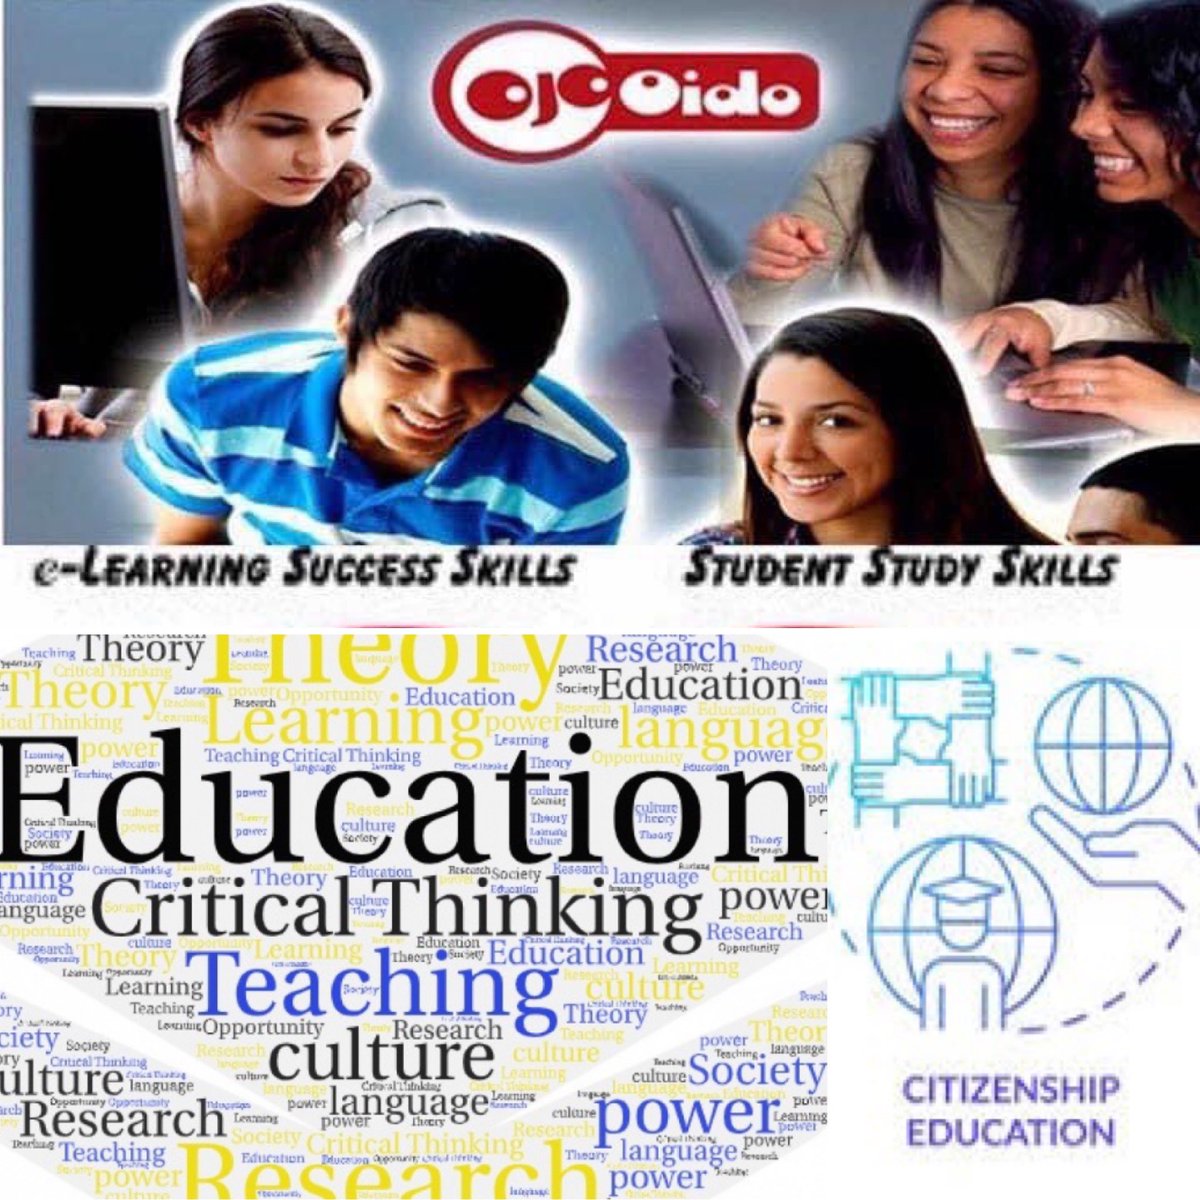 America’s public schools must prioritize opportunities for all students to engage in and develop disciplined reasoning in a learning environment that exposes them to opposing points of views that challenge their world view and beliefs.  lnkd.in/ge-xdimN 

#civiceducation